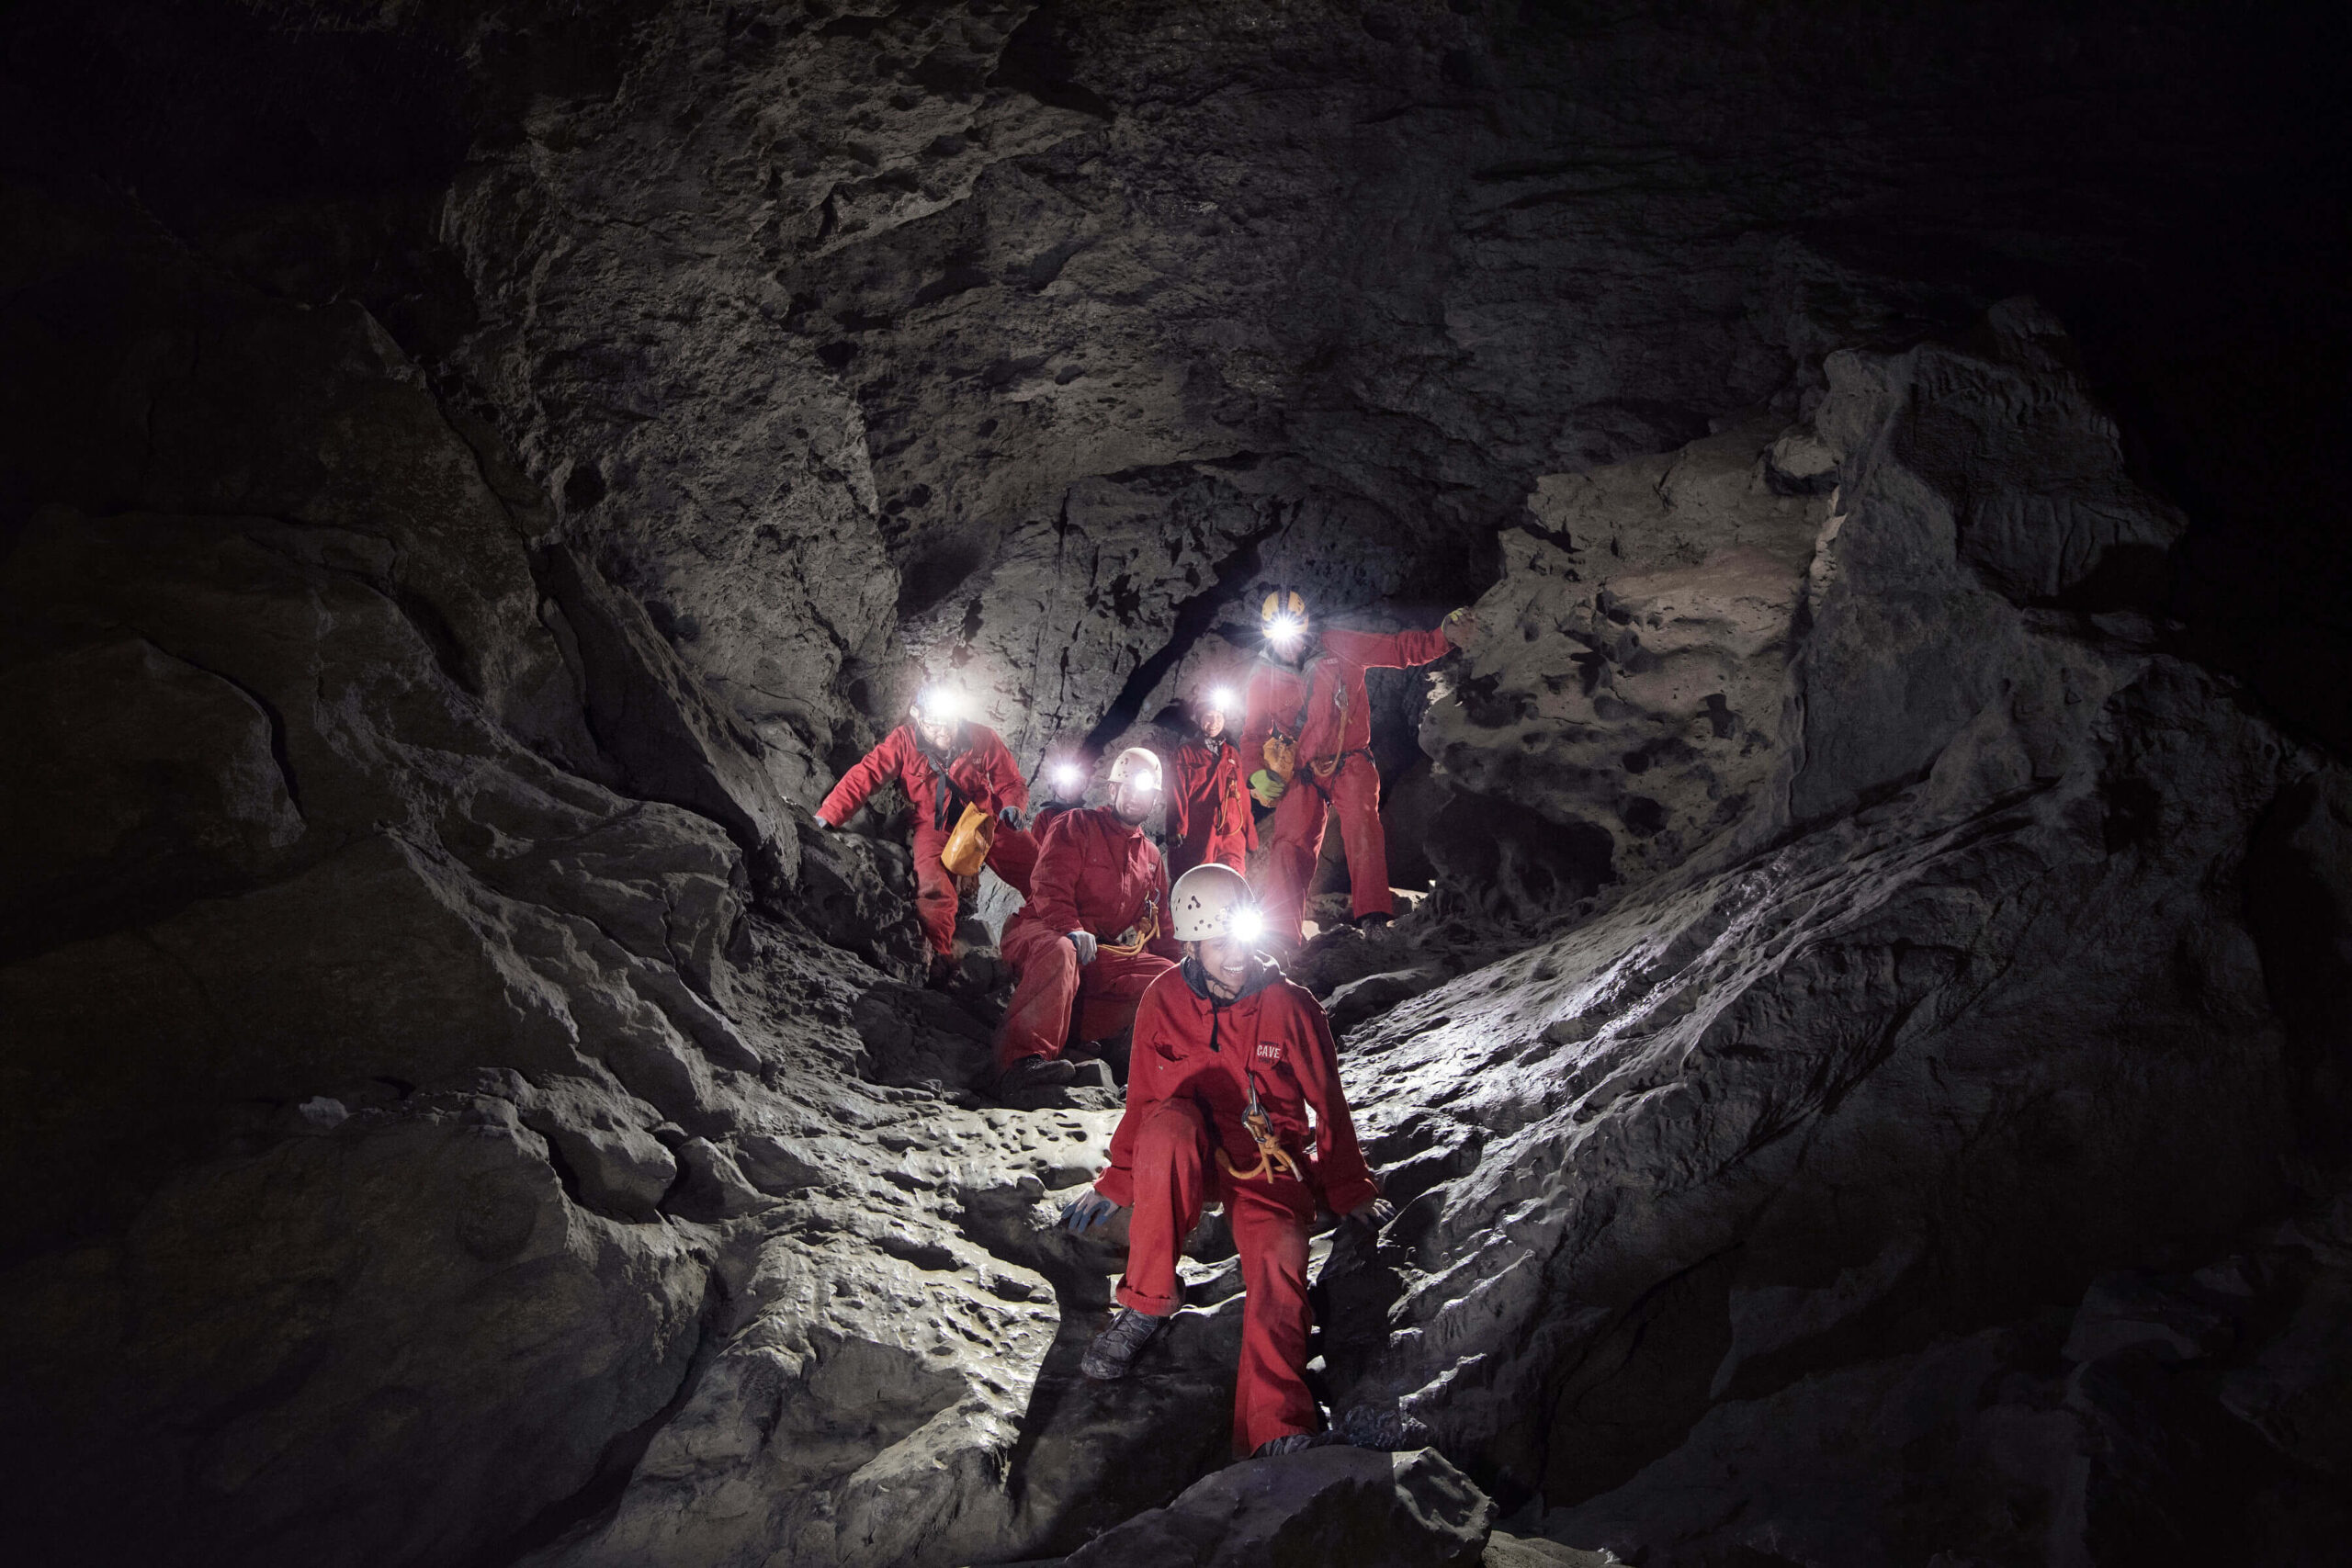 Embark on an Underground Adventure with Canmore Cave Tours at the Grizzly Classic Men's Artistic Gymnastics Competition.